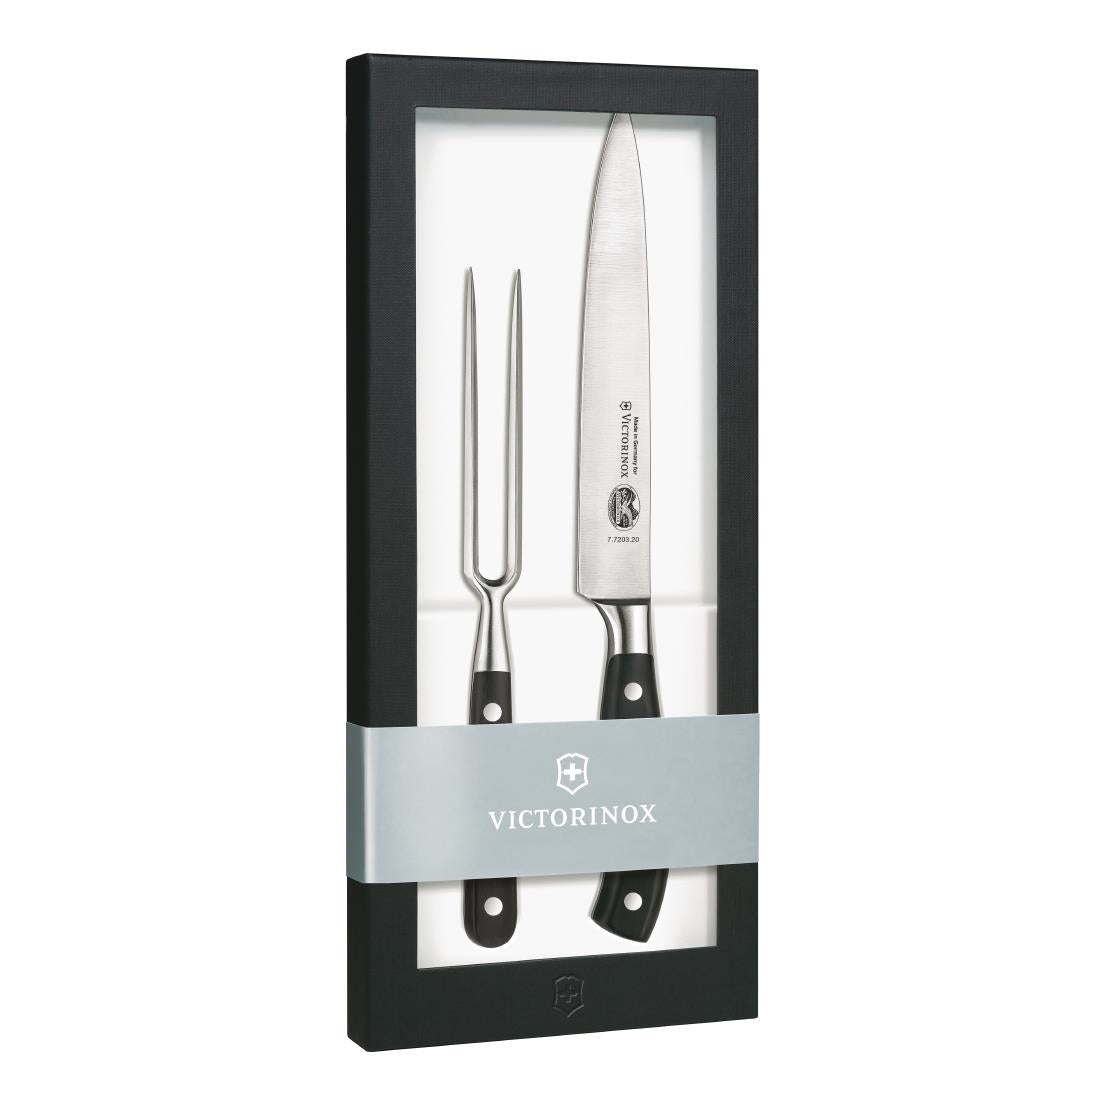 DC020 Victorinox Carving 2-Piece Knife and Fork Gift Set - DC020